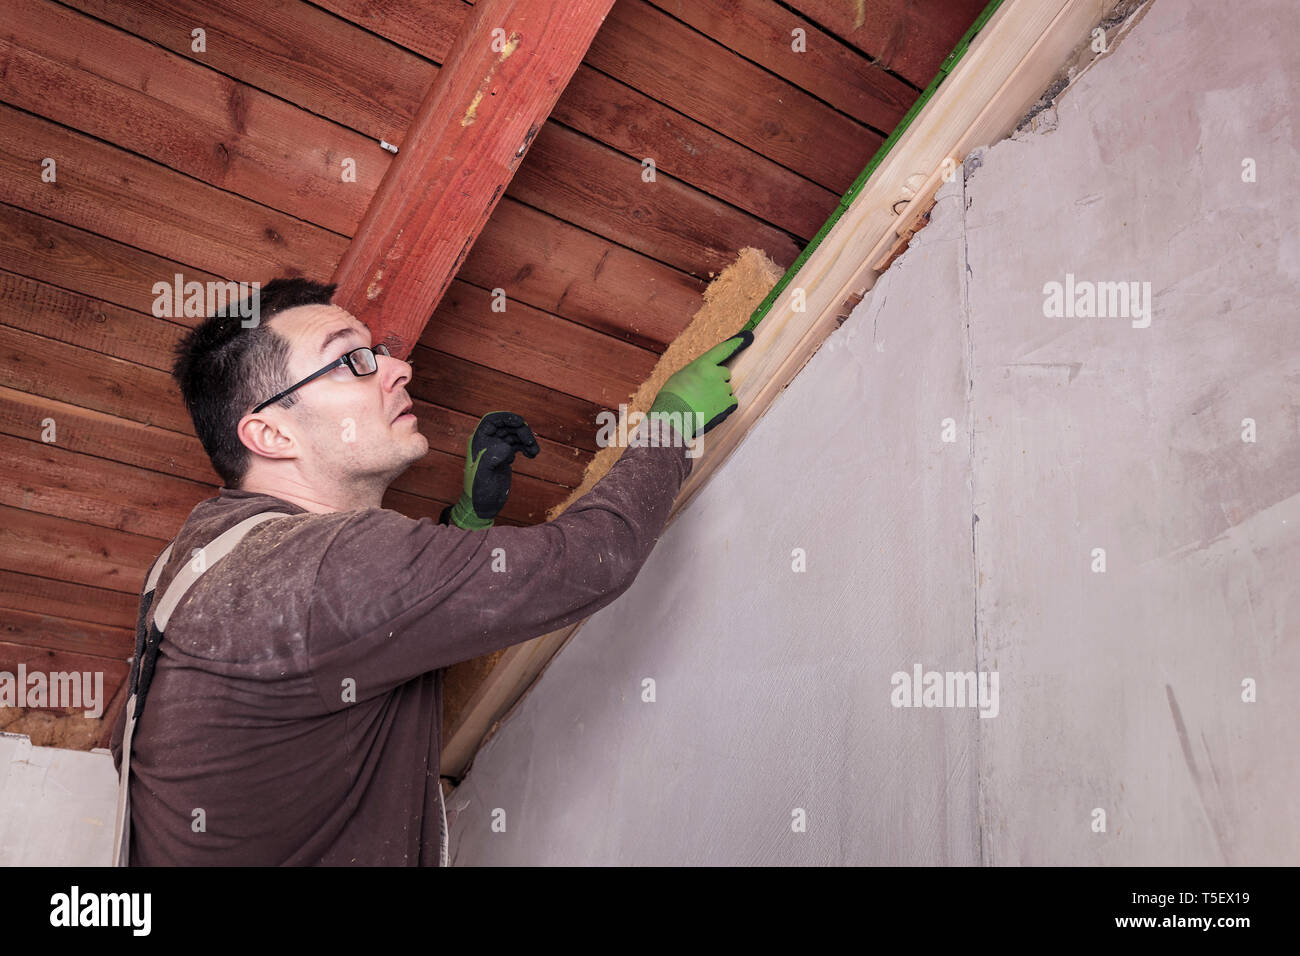 Roof insulation, worker filling pitched roof with wood fibre insulation Stock Photo